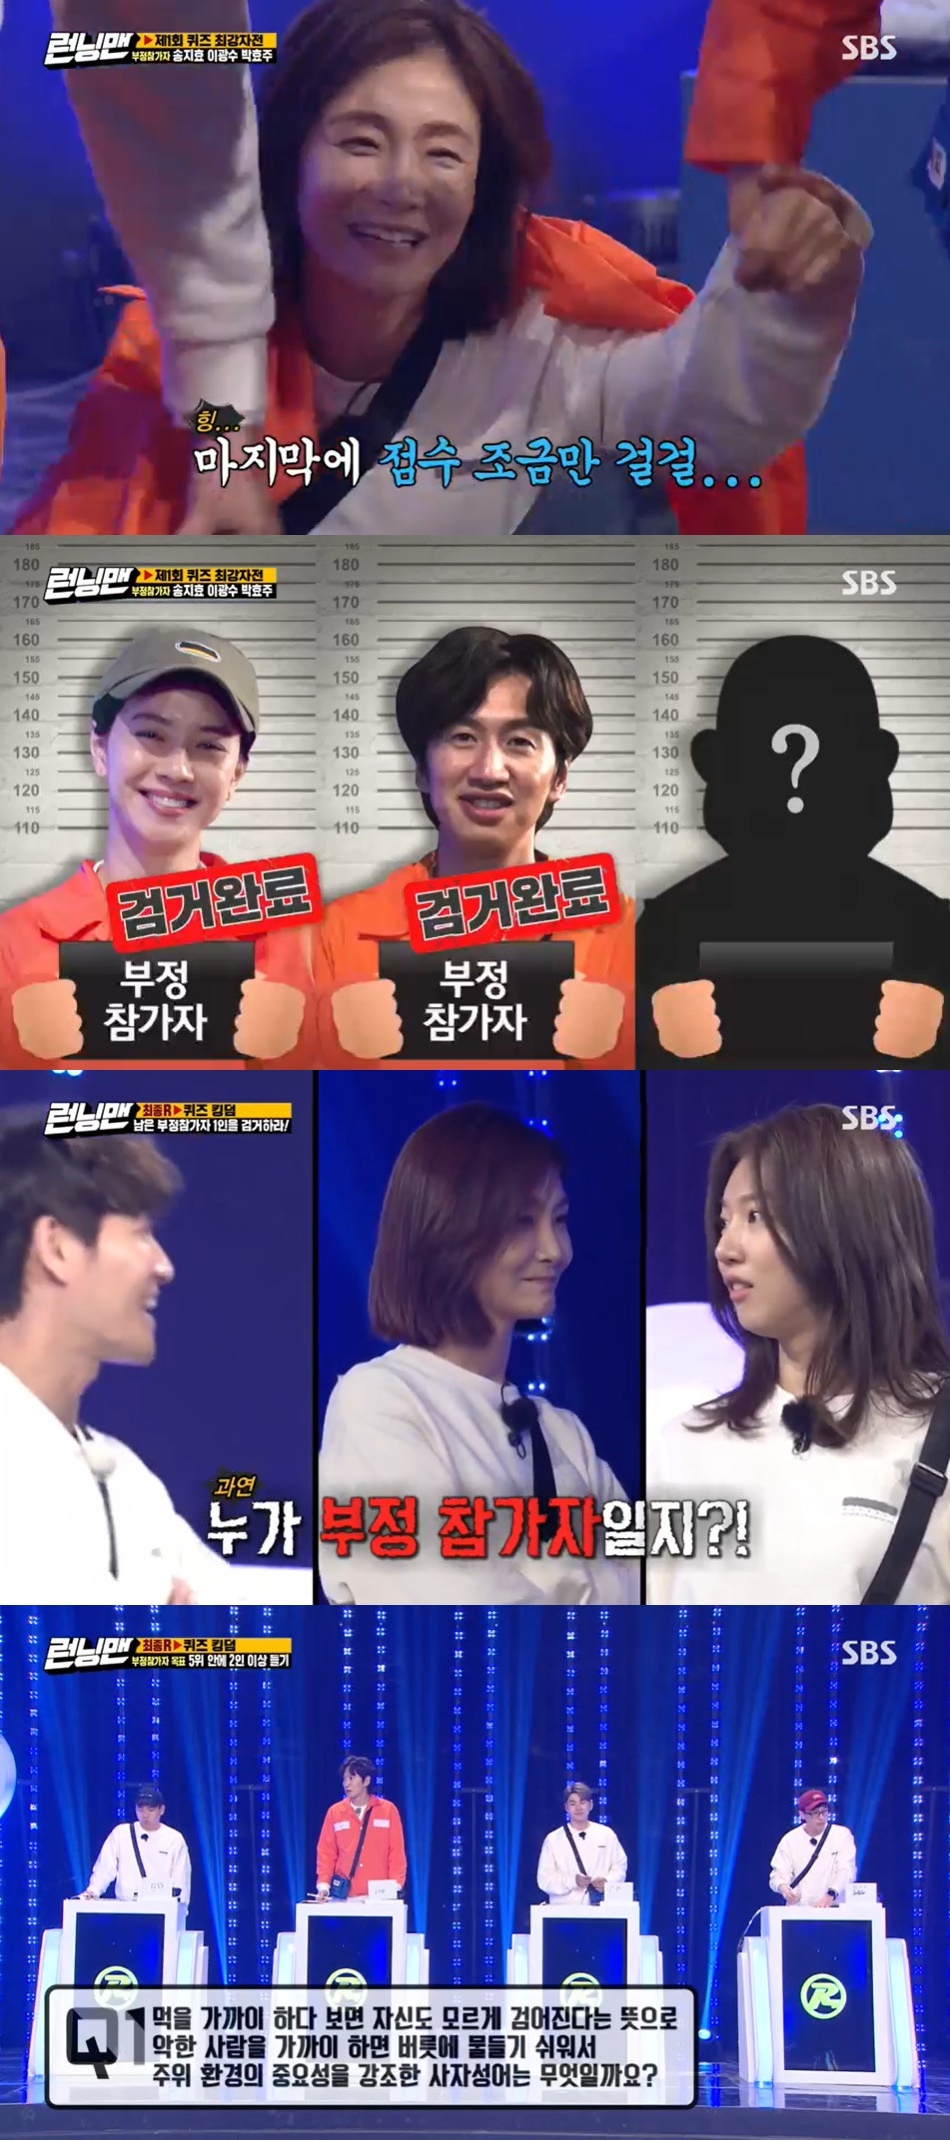 Seoul = = Running Man Actor Park Hyo-joo was arrested as the last unqualified participant.In the SBS entertainment program Running Man broadcasted at 5 pm on March 3, Ha Yeon-joo Park Hyo-joo Kwak Si-kyung appeared as a guest and performed The 1st Running Man Quiz.On this day, Game was conducted in a way that required three unreasonable participants to know the correct answer in each quiz showdown.If two out of three undocumented participants were in the fifth place, they would win, and if they did not get to the list before that, the rest of the members would win.The members and guests then played a full-scale quiz showdown. The first round was a foreign agitation dictation.At this time, Ha Yeon-joo scored the highest score, 140, followed by Lee Kwang-soo with 130, which surprised everyone.The Korean language dialogues were also contested by foreigners, who were appalled by the unimaginable difficulty of dictation and gave out the wrong answers.The first ever arrested cheater on the first round was Song Ji-hyo.Song Ji-hyo, who showed extraordinary ability every problem, bought everyones suspicions, but Song Ji-hyo added a smile by saying, I actually did not memorize anything (the correct answer).The second round was a quiz to match the Anquets rankings; the first one was about the saddest moment for lover.At this time, Yang Se-chan chose Kim Jong-guks When I was watching the phone every time I was on a date and hit the first place in the Anquet.However, Song Ji-hyo, who knew the correct answer in advance, did not memorize the correct answer and made the wrong answer.The actions of a woman who makes a man mistaken Anquette also appeared.Yang Se-chan, who saw all the answers at this time, said, That is all I did from the first to the fifth place. I can not make a mistake.The cheater identified in the second round was Yoo Jae-Suk; however, Yoo Jae-Suk was not a cheater, and the members were confused.In the third round, the questioner expressed the given sentence in dance and proceeded in the form of matching the correct answer.At this time Lee Kwang-soo was suspicious, too accurate, and eventually became a cheater.In particular, Lee Kwang-soo was caught with a cheating phrase on his forearm to memorize the answer and heckled the members.The final round was played in a form that would be allocated if each score was batted and the correct answer was met, but when the correct answer was wrong, the score was rather reduced.At this time, Lee Kwang-soo deliberately cheated with his hands, and the members laughed, saying, I can not cheat.So all the quiz ends and the cheaters have succeeded in the mission of two in the top five.At this time, Park Hyo-joo was identified as the last suspect of the illegal participant, and it was revealed that Park Hyo-joo was a fraudulent participant.So all the last negative participants were arrested and the members of the first to fifth place won the championship.